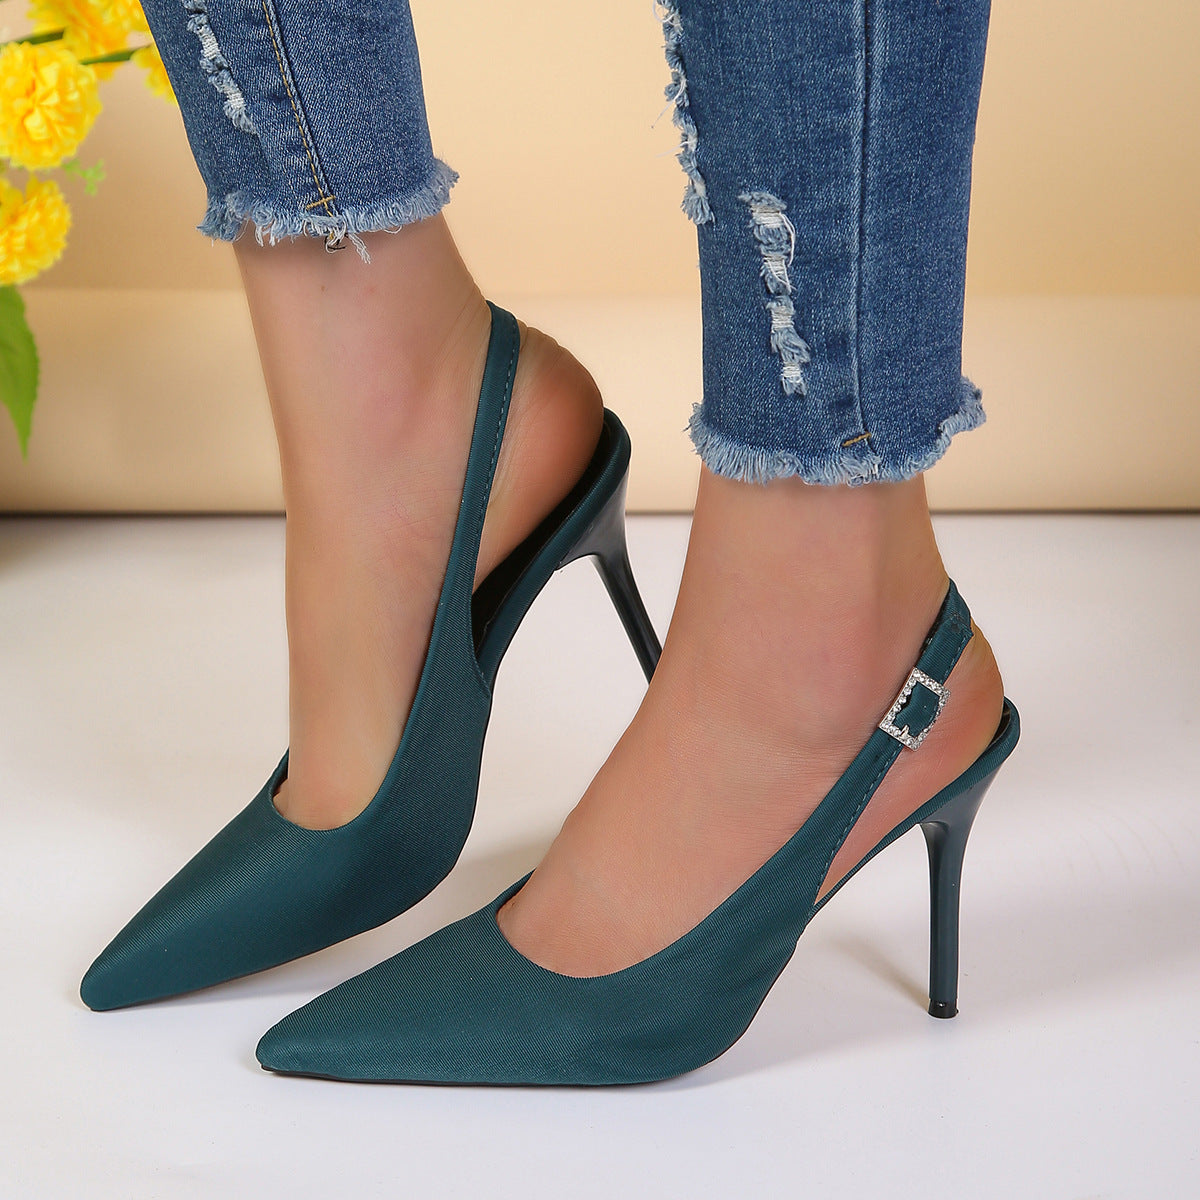 Pointed Toe Fashion Stiletto Heels Shoes For Women